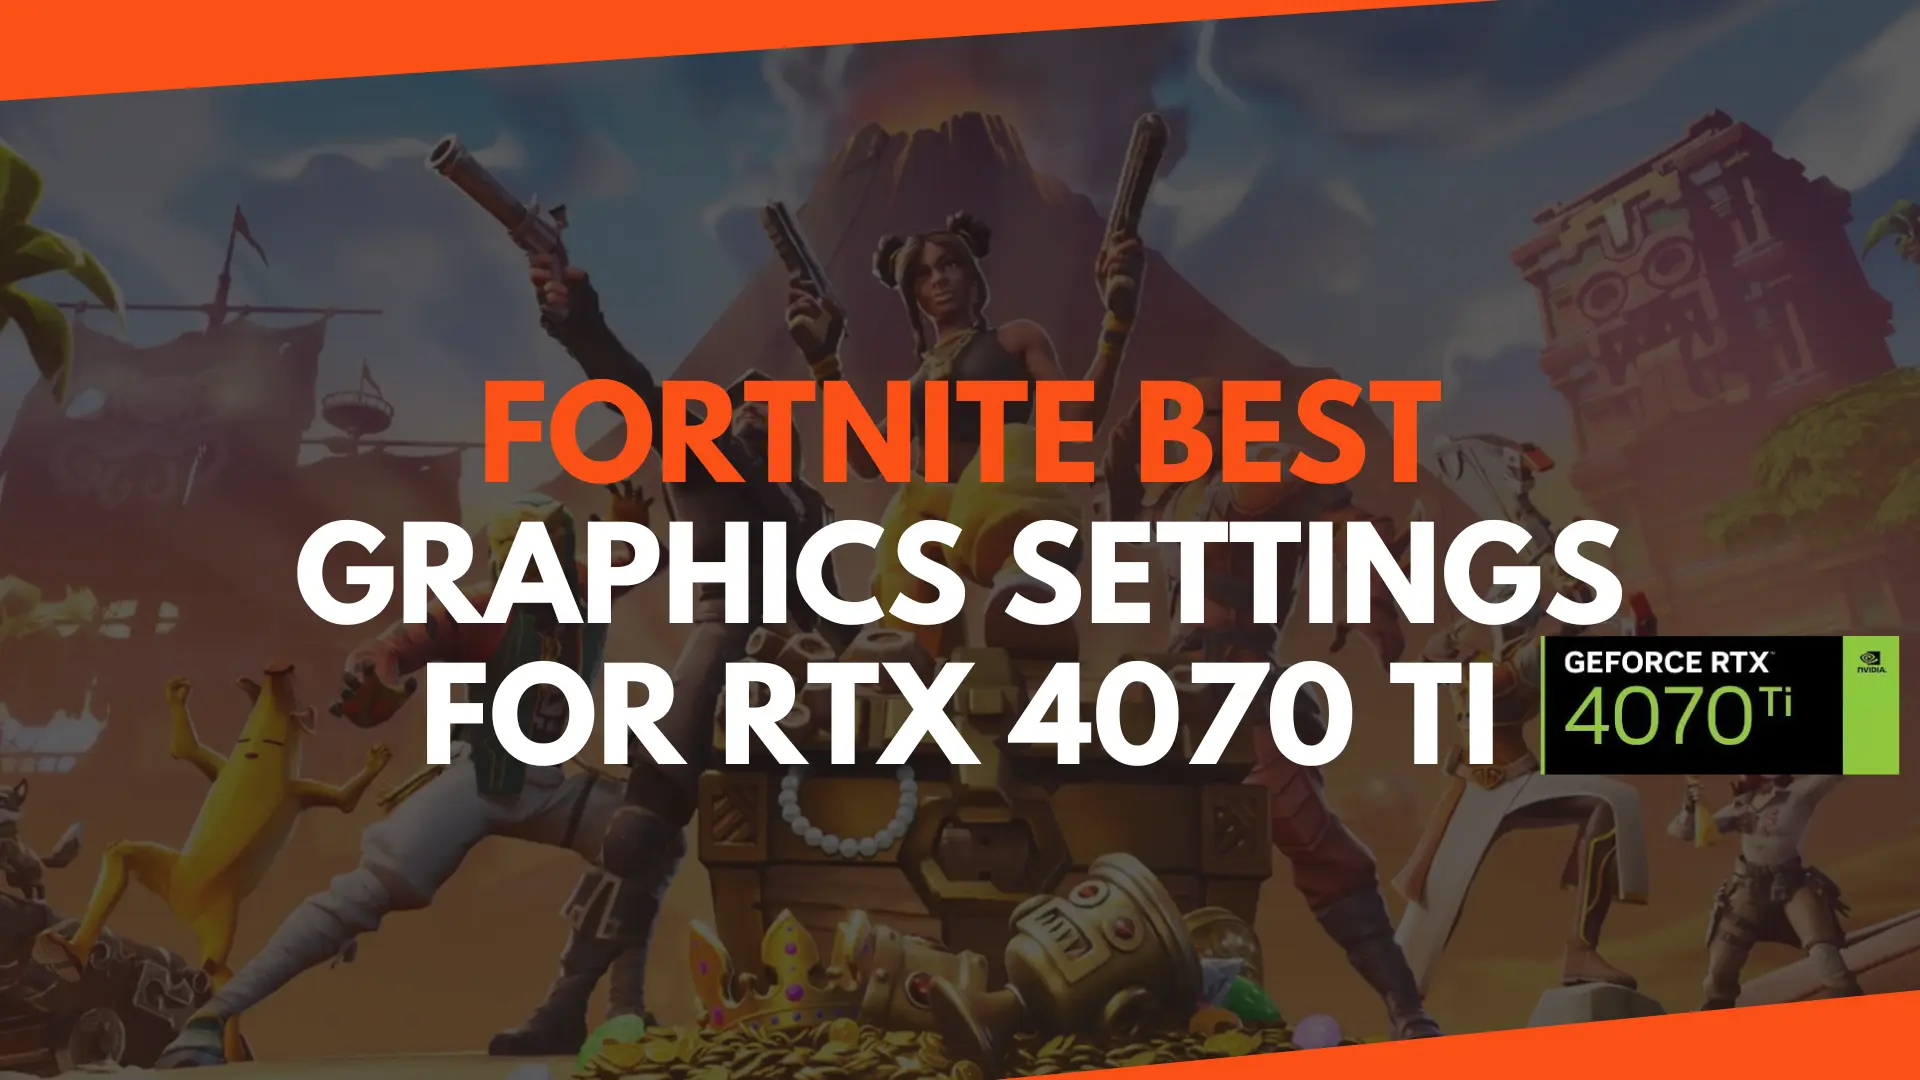 Fortnite Best Graphics Settings For RTX 4070 Ti